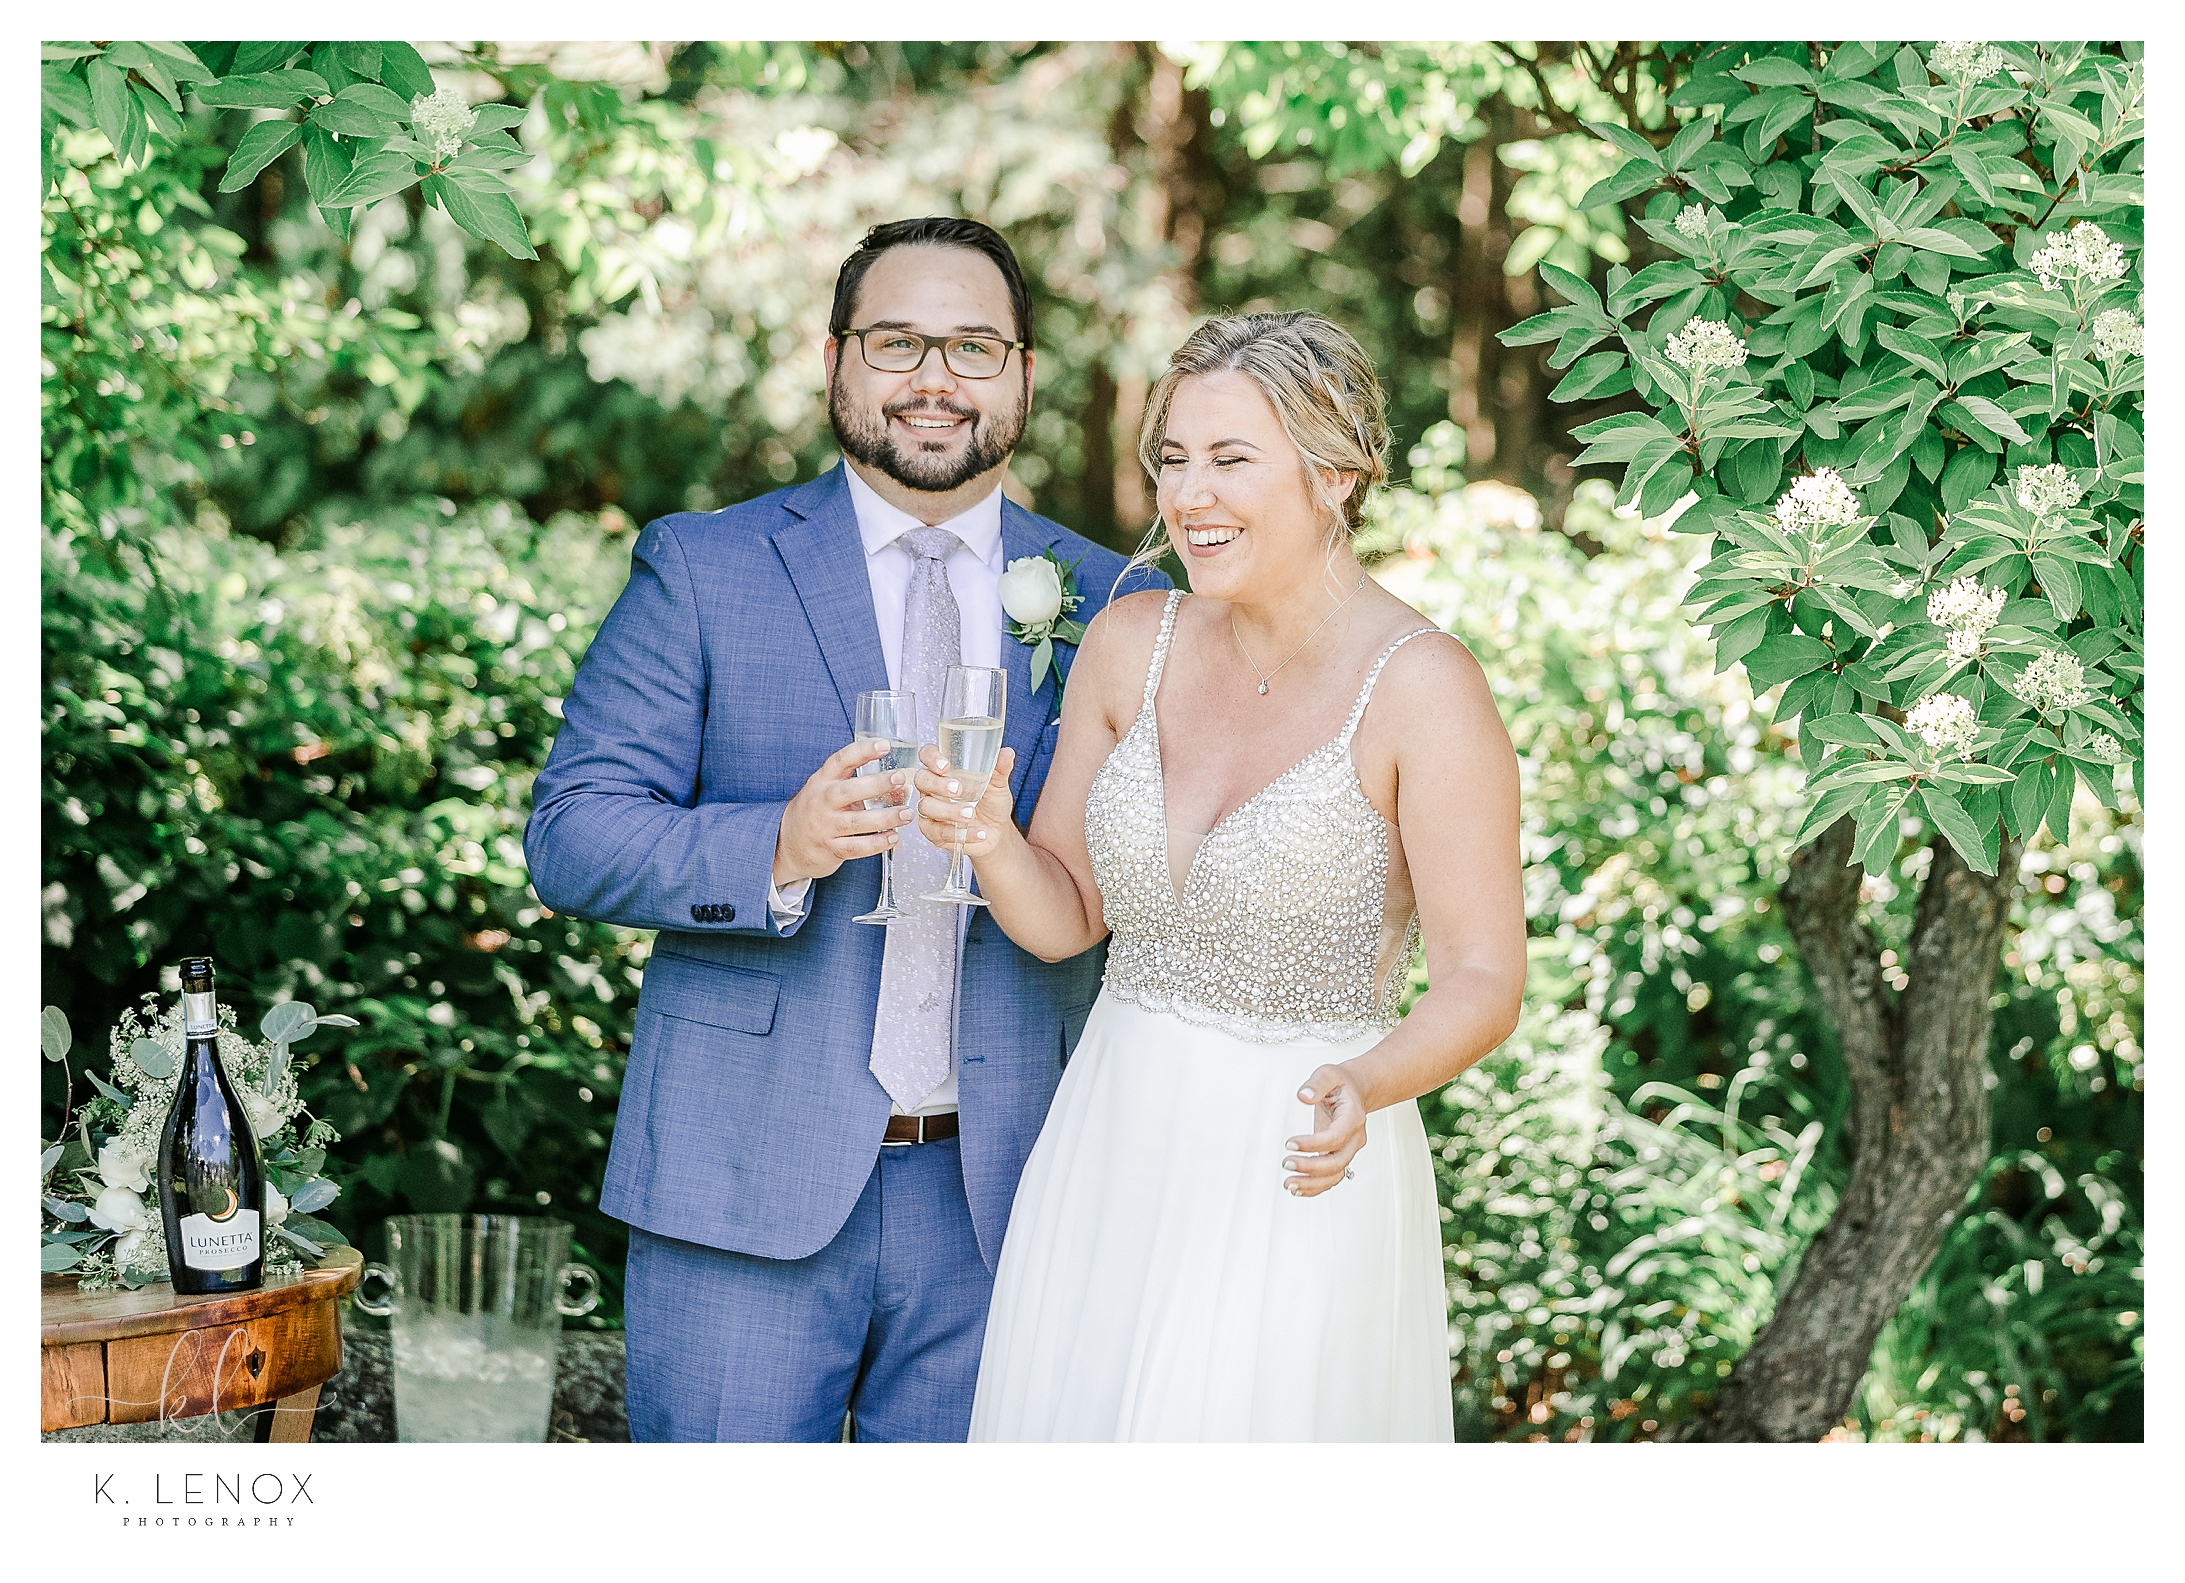 Light and Airy Intimate Wedding at Moran Estates- Bride and Groom Toast with Champagne 